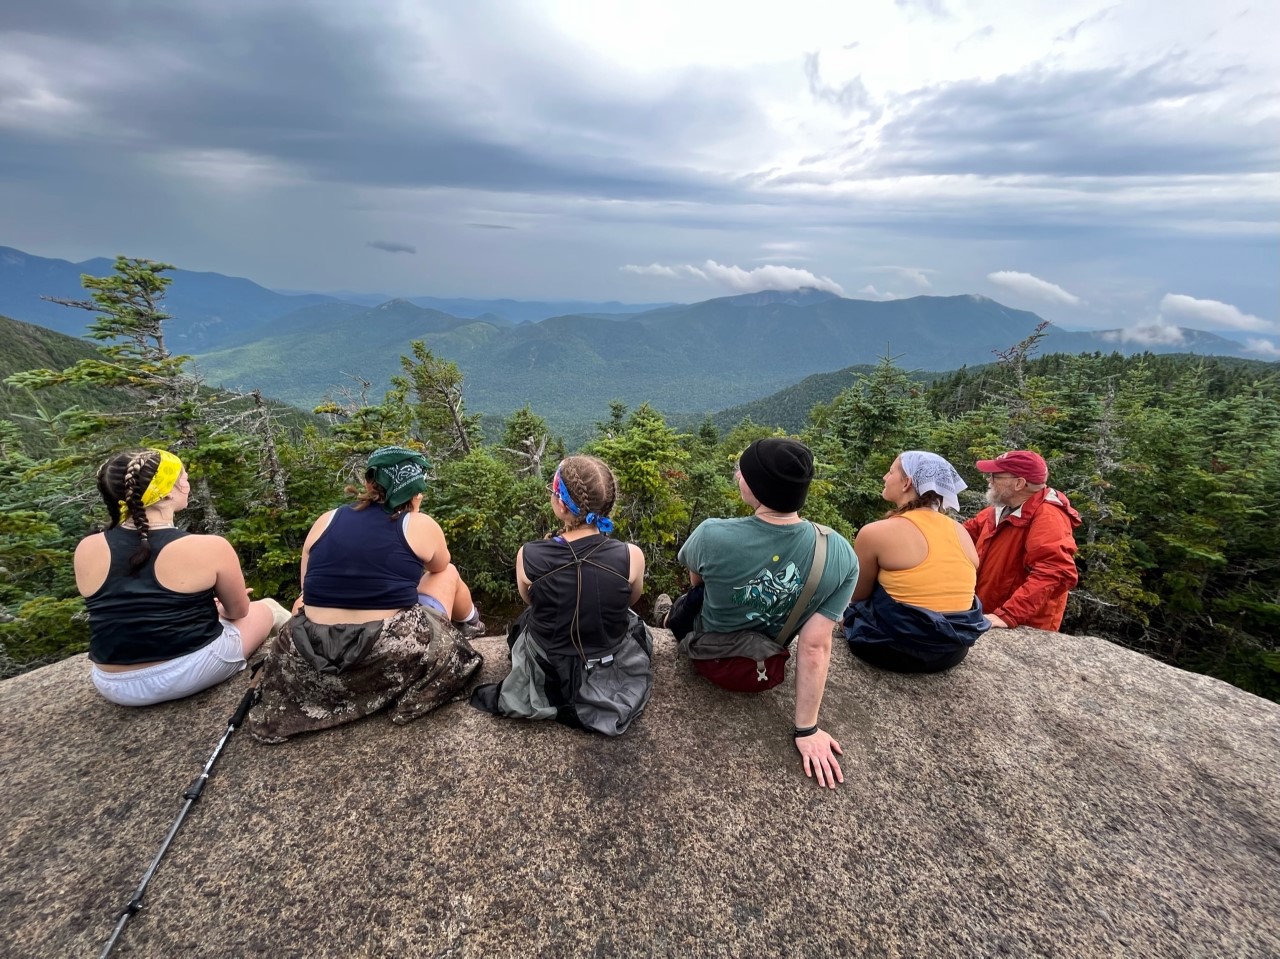 Students on Wilderness Trip, sitting on giant boulder